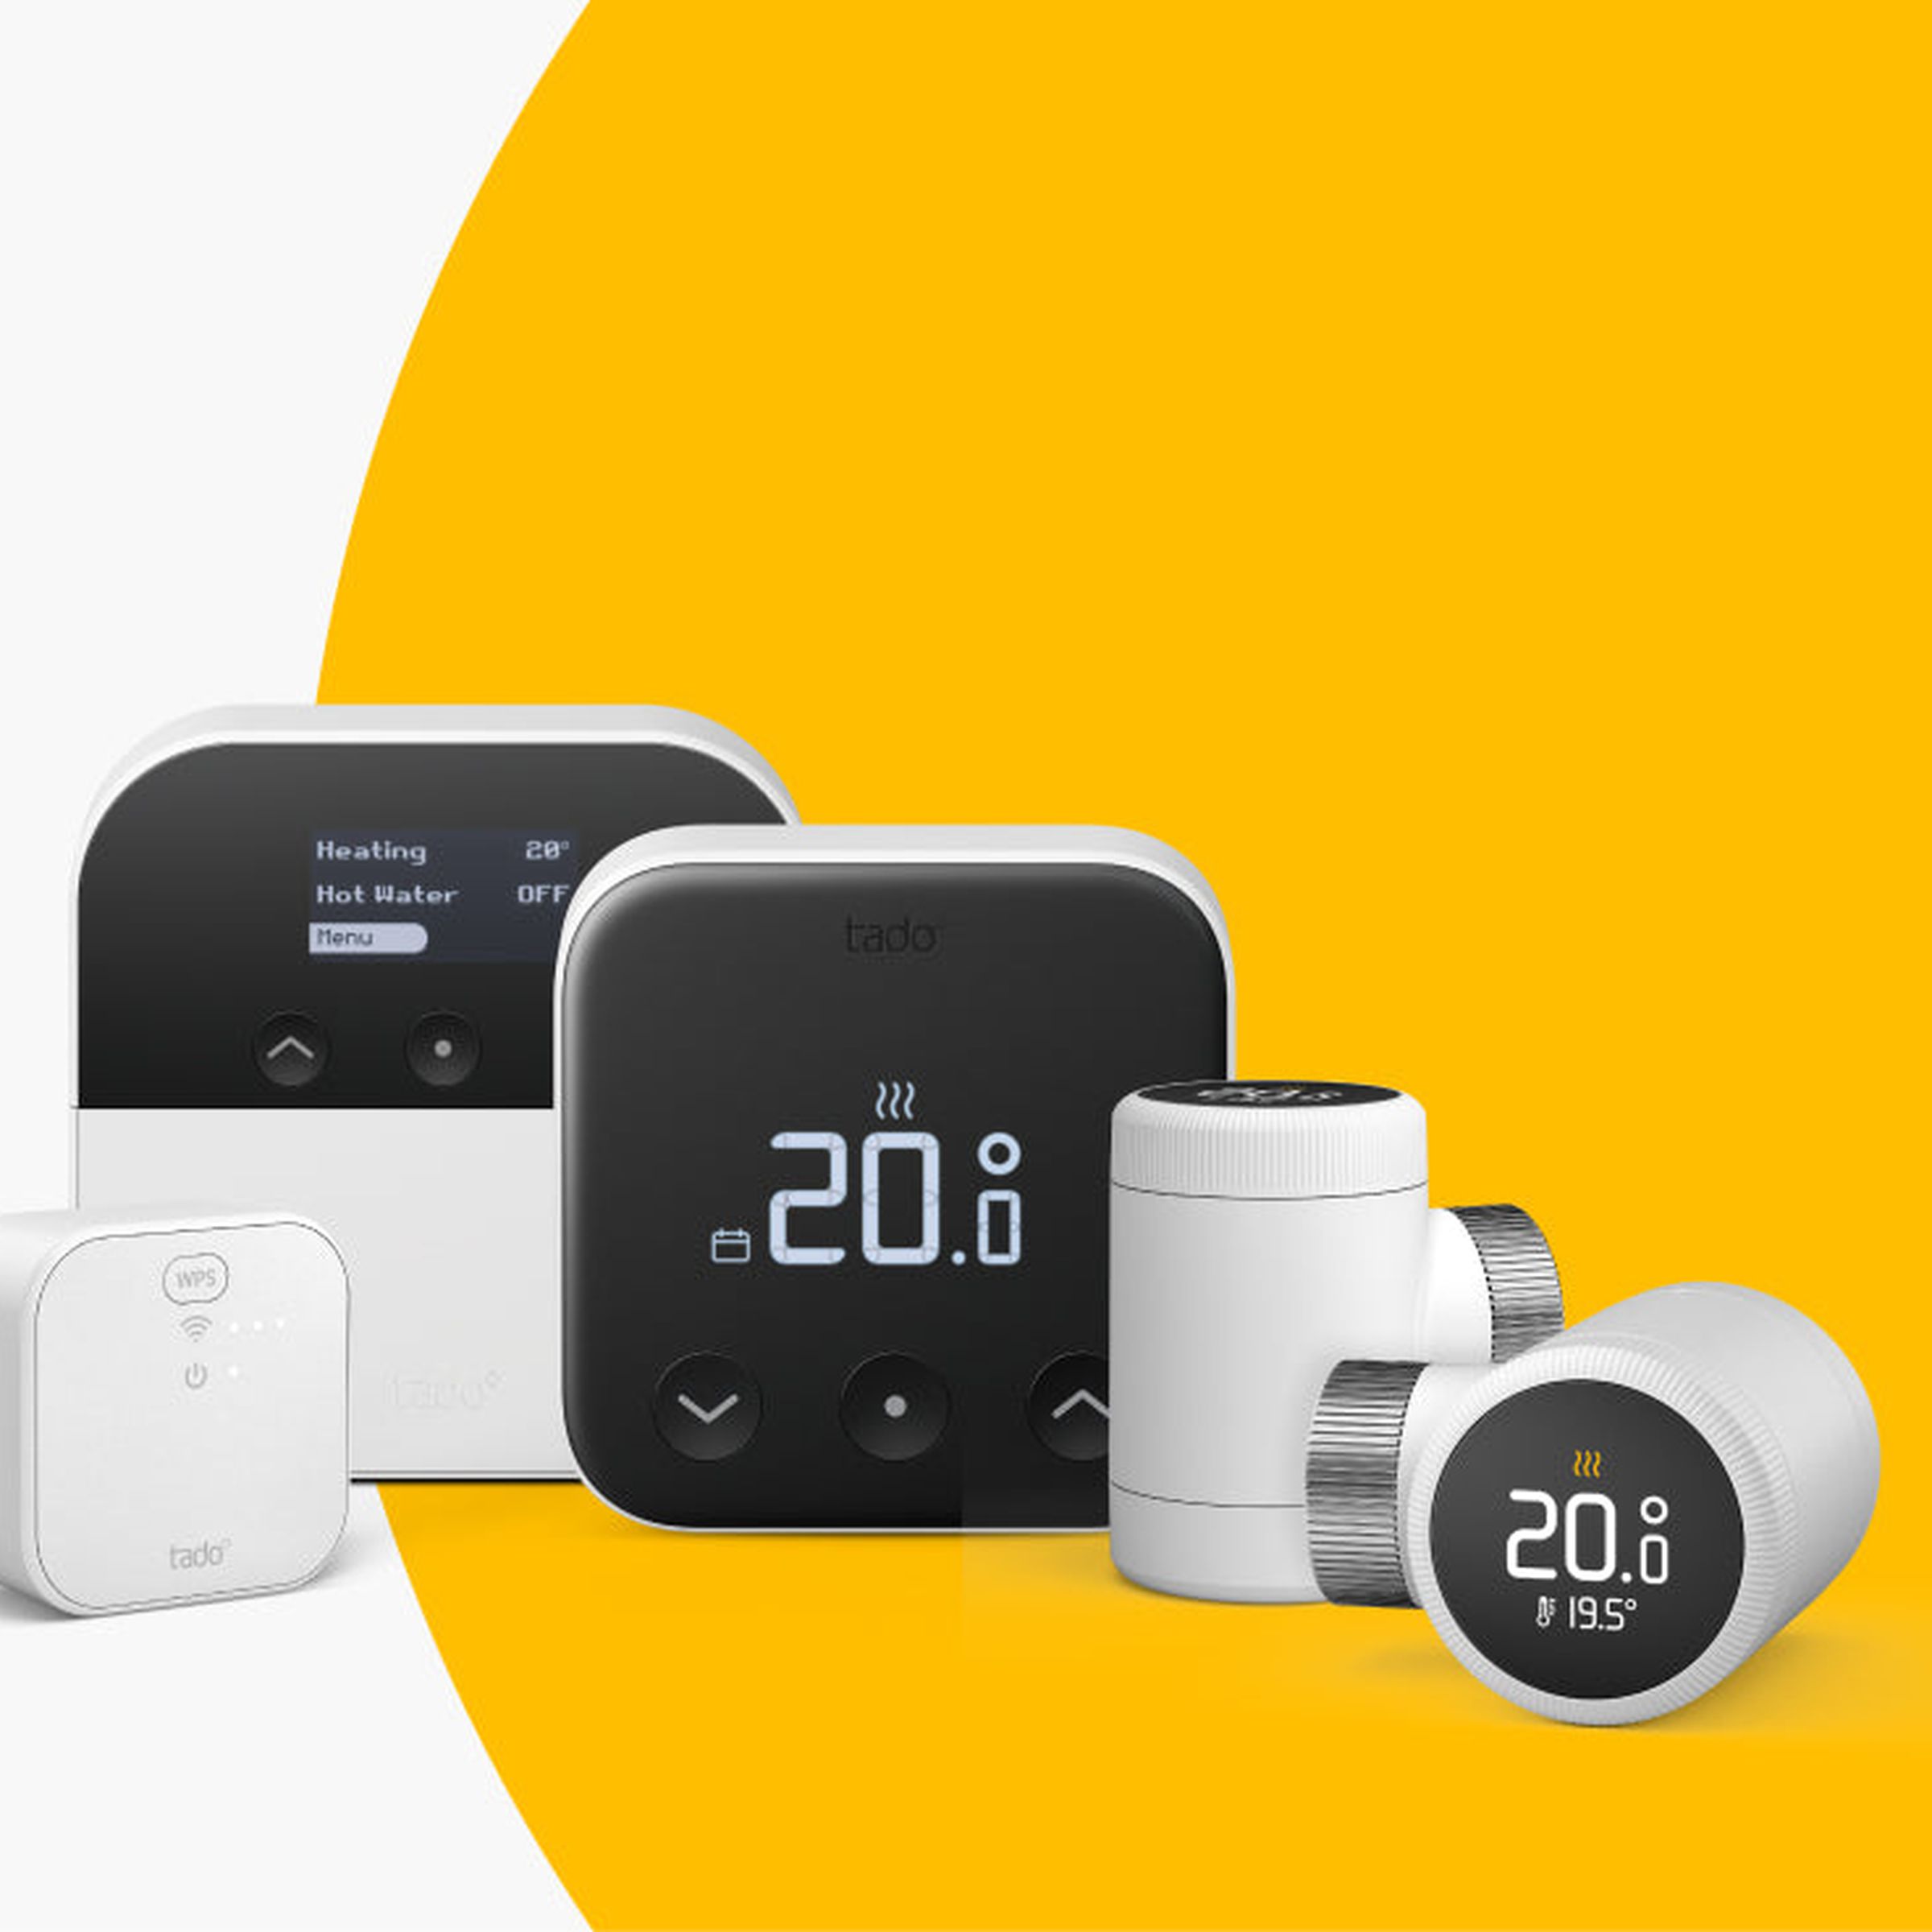 Product family image showing the Wireless Temperature Sensor X, Heat Pump Optimizer X, Thermostat X, and two Smart Radiator Thermostat X